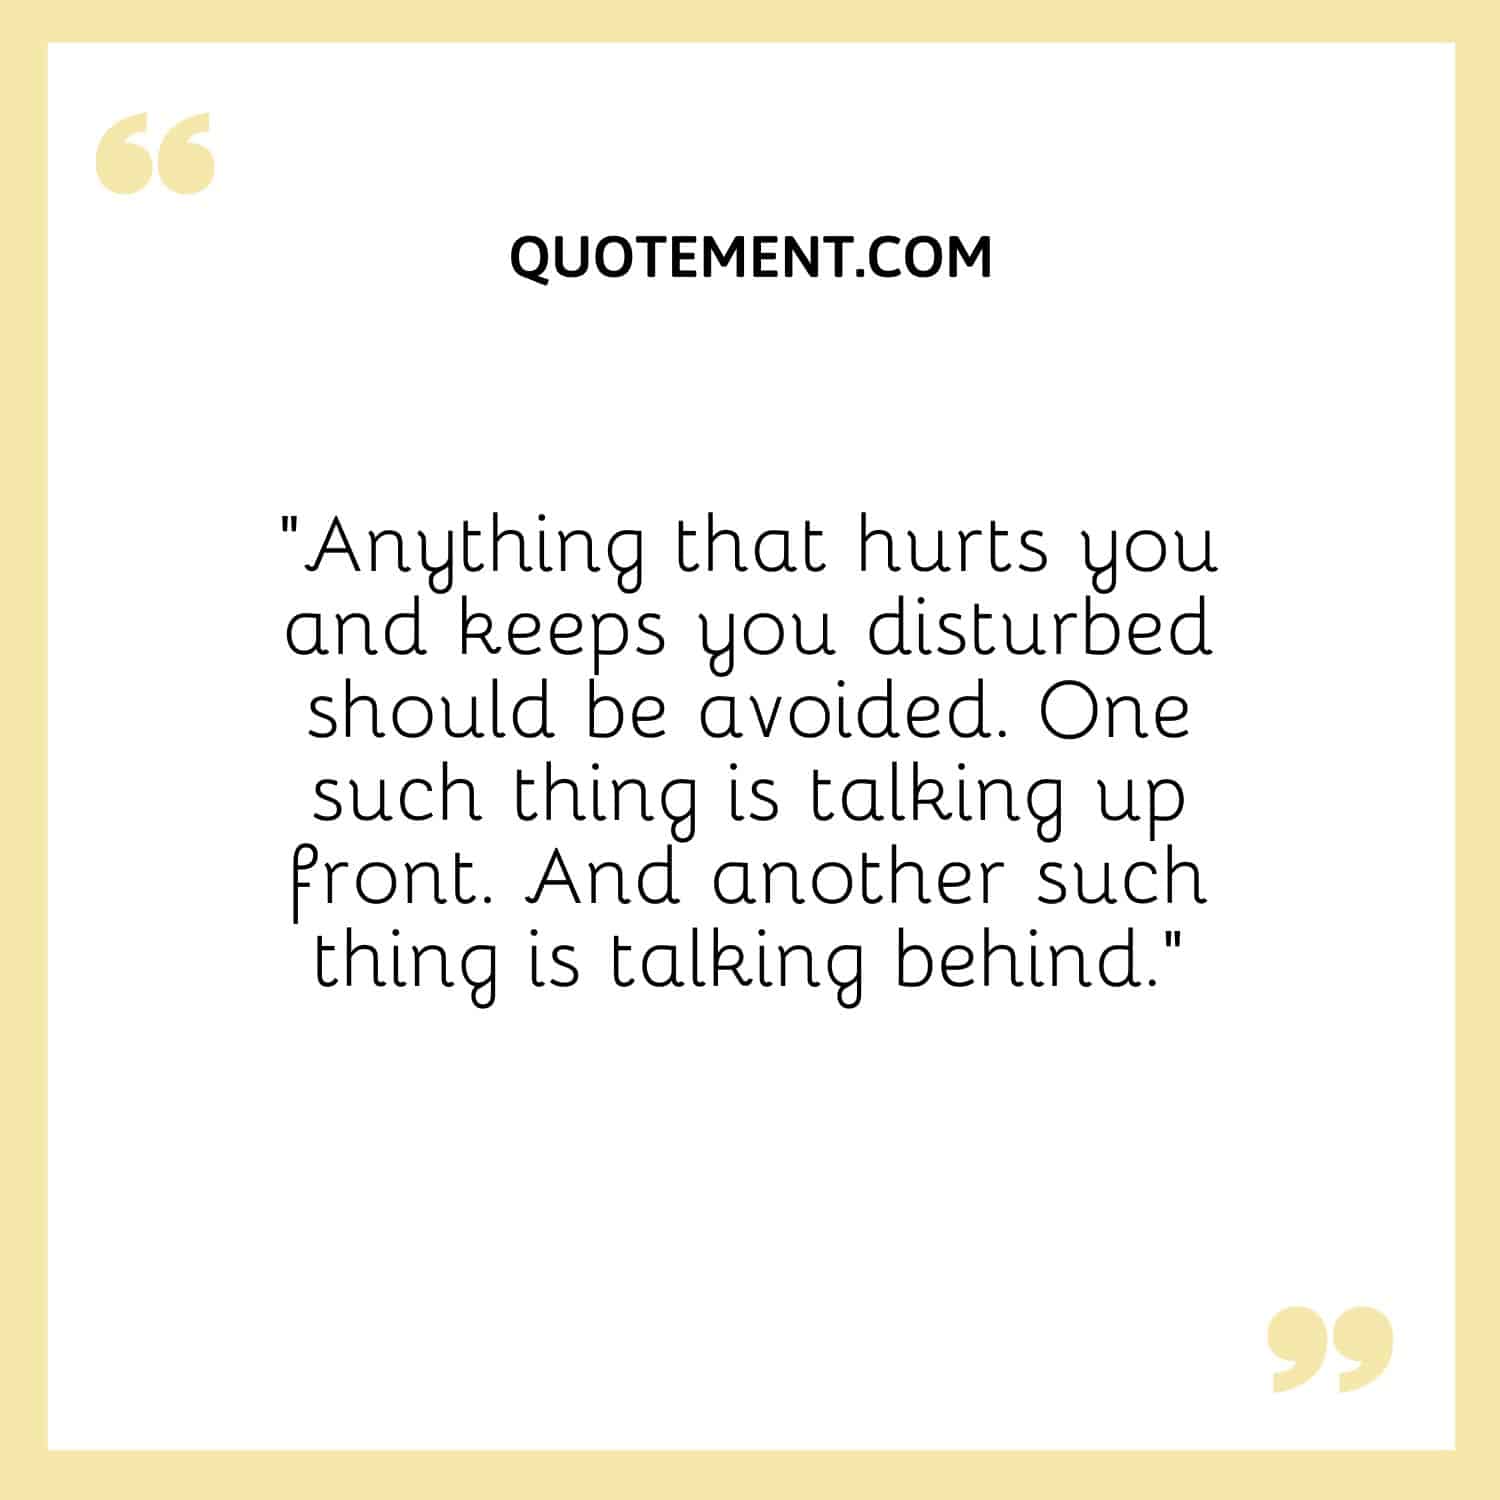 “Anything that hurts you and keeps you disturbed should be avoided. One such thing is talking up front. And another such thing is talking behind.”